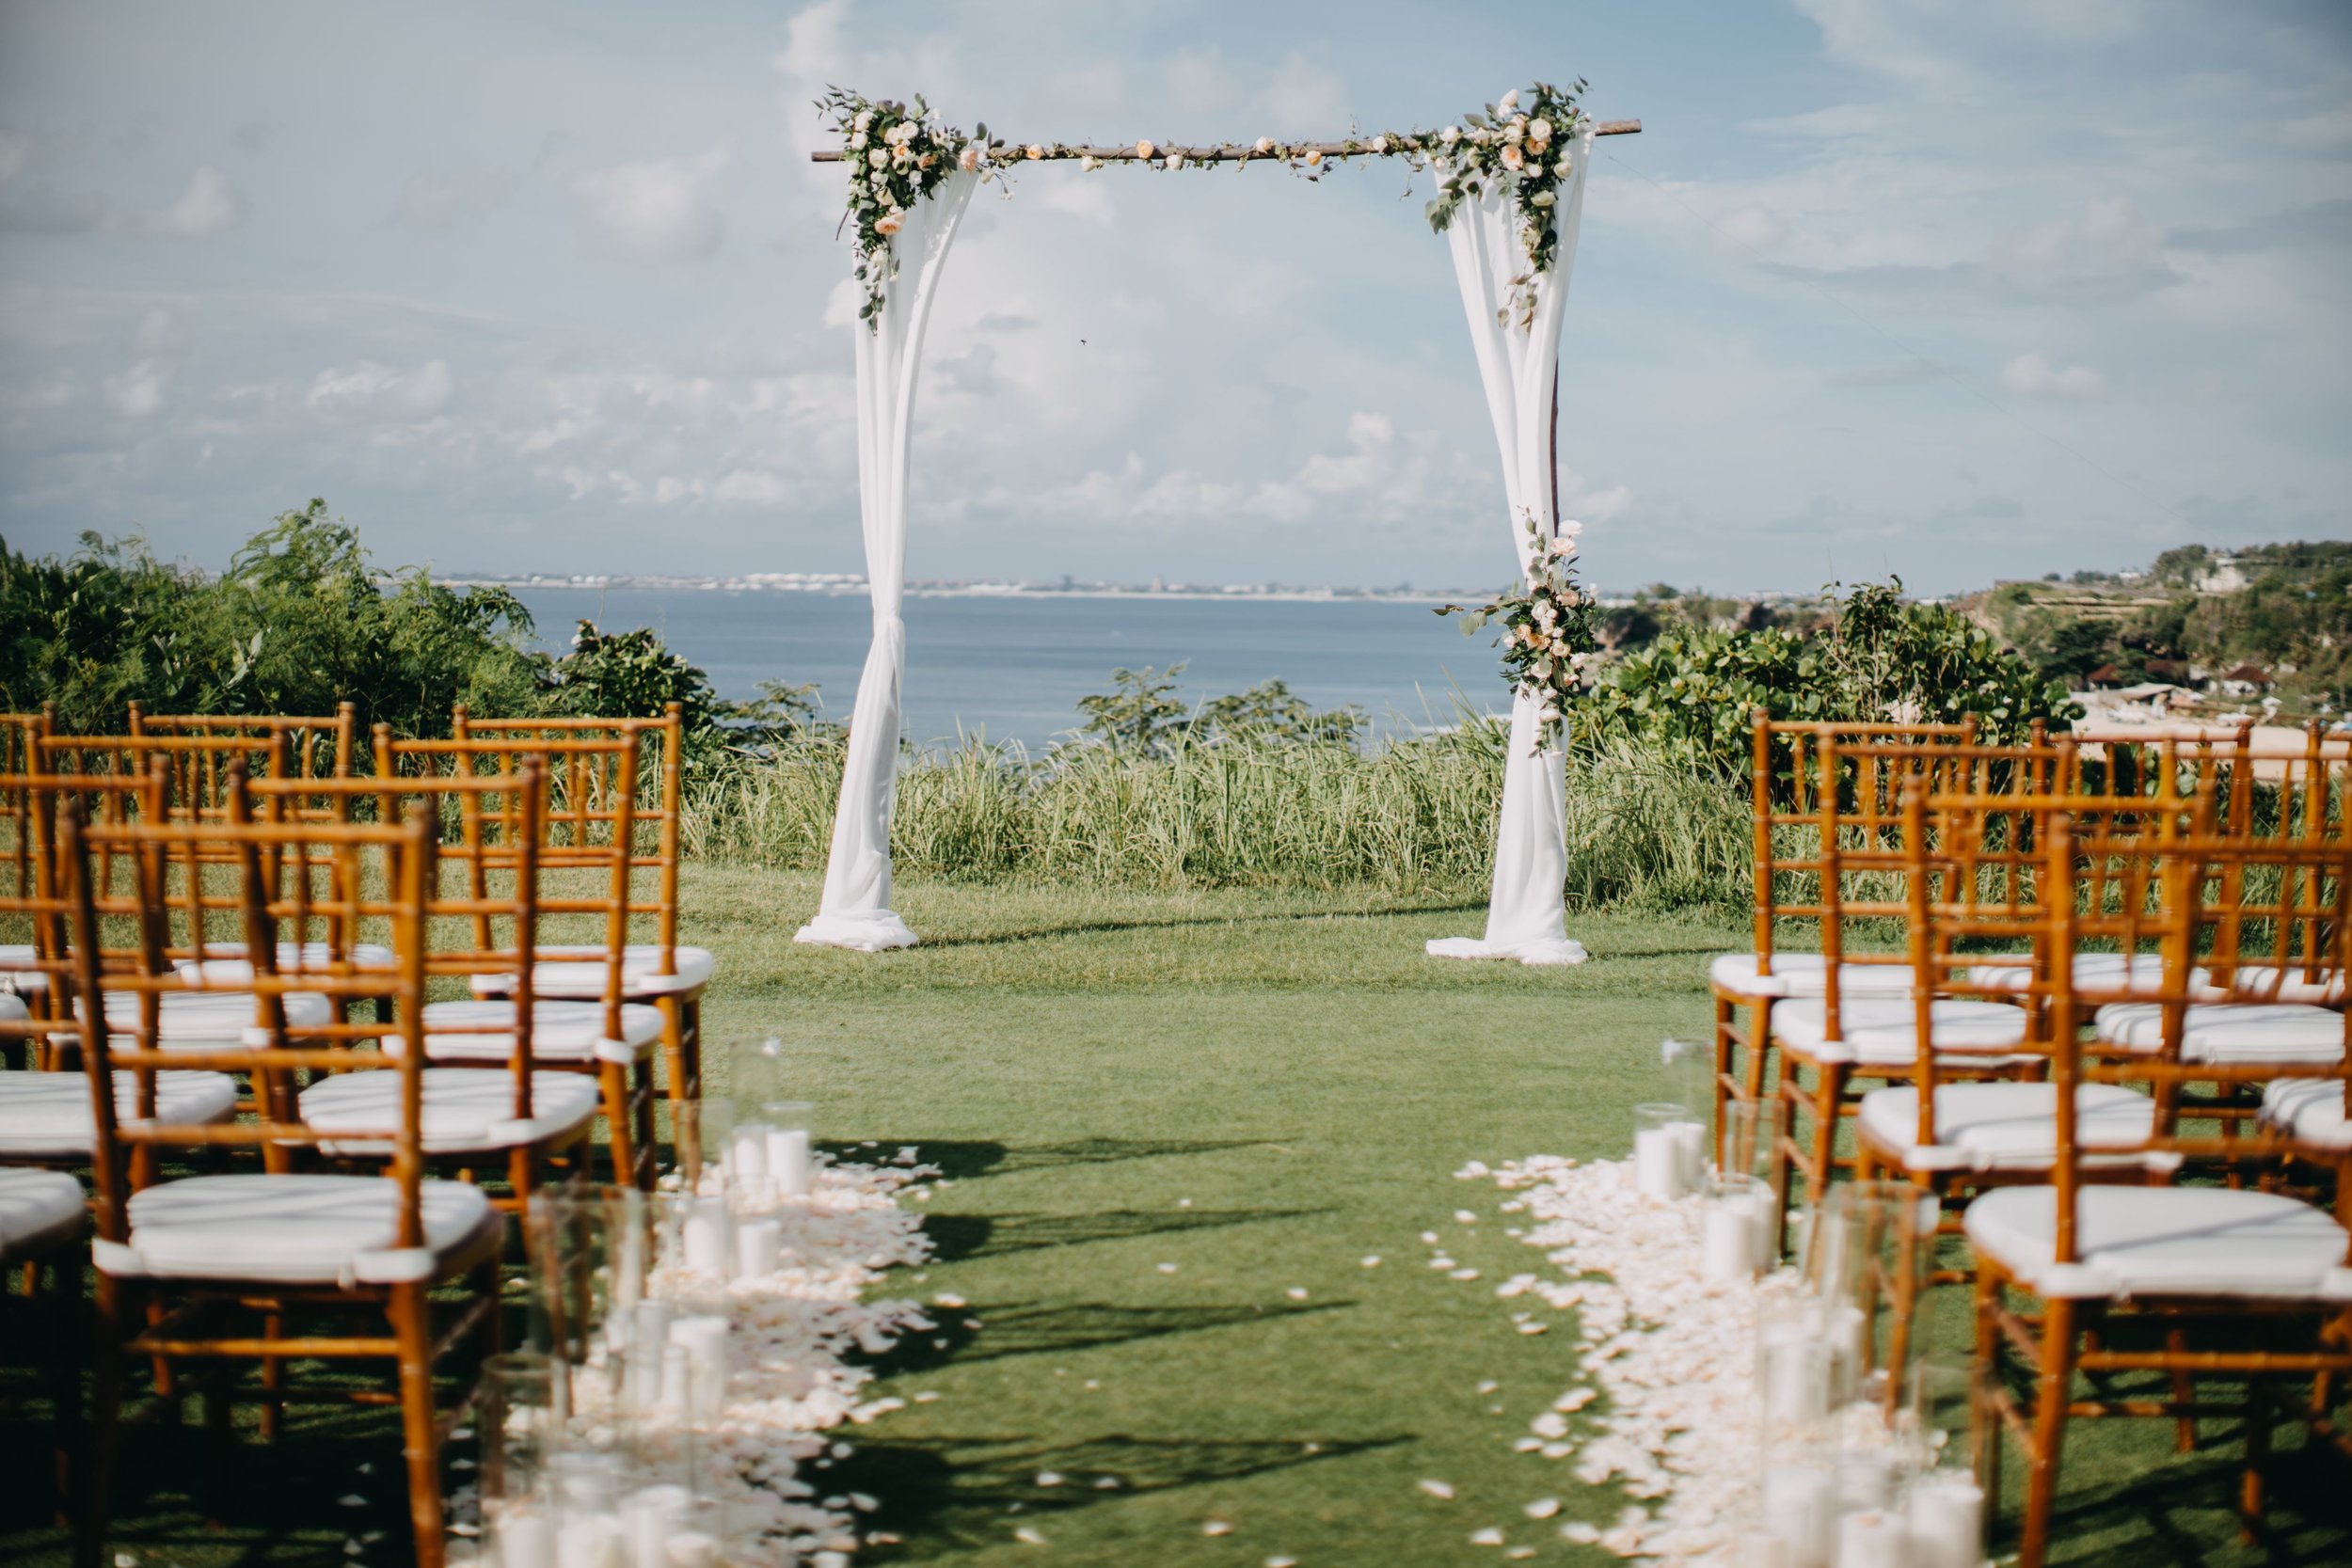 Stunning Setting, Image from Silverdust Decoration